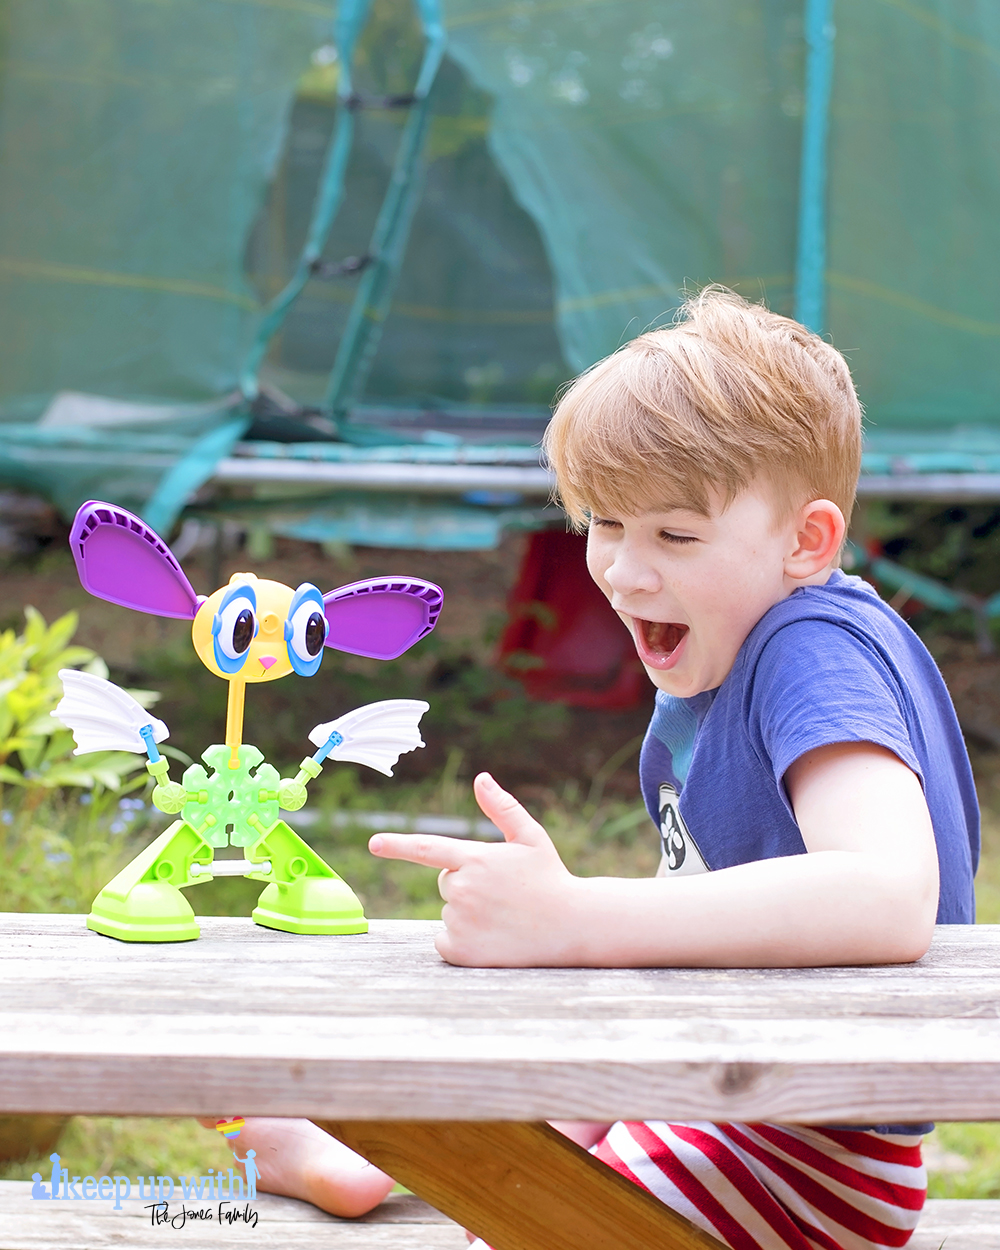 Image shows a boy with blond hair sat at a picnic table, pointing at a toy in front of him.  On the wooden picnic table in front of them is a rabbit like creature, which is made from pieces of the Kid K'nex Budding Builders construction toys box from Basic Fun UK.  By Keep Up With The Jones Family.